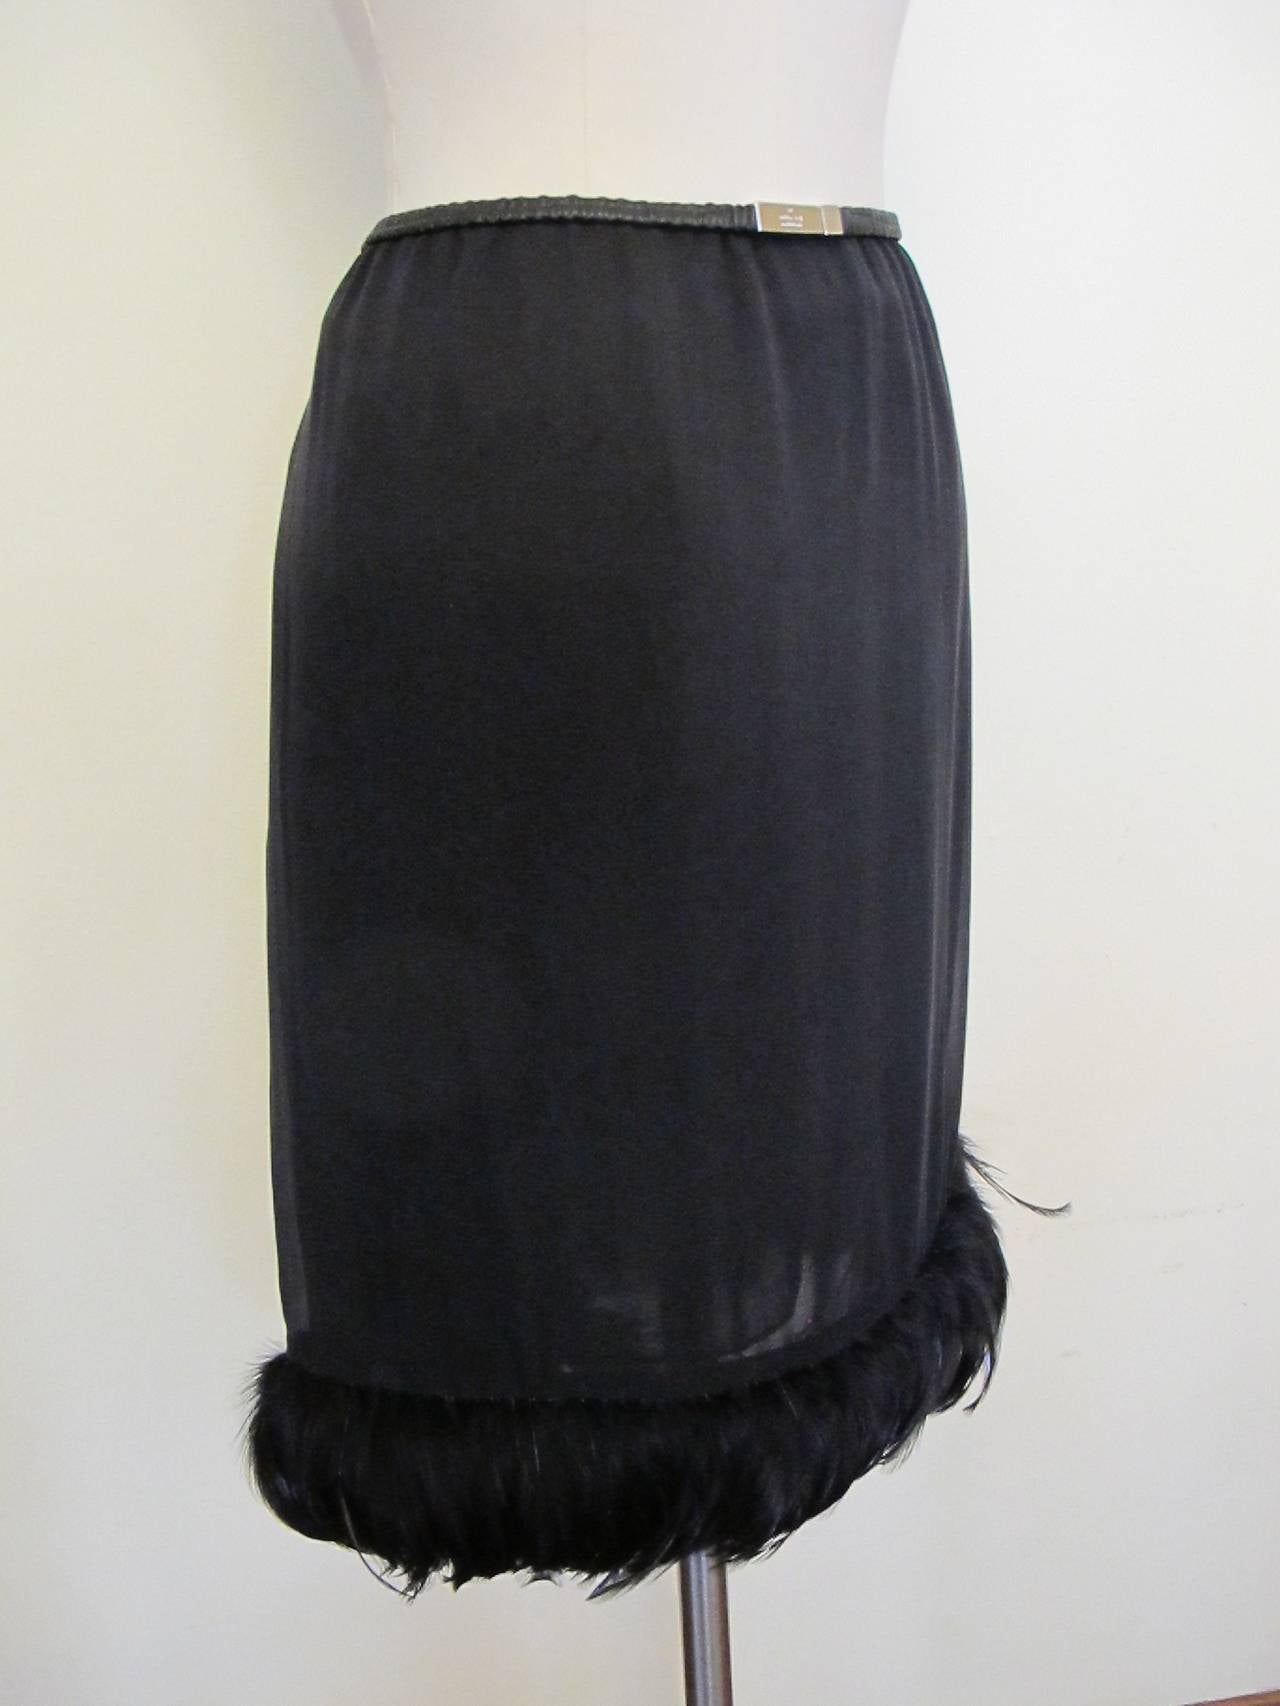 Charming silk skirt with leather elastic at waist and a feathered trim at bottom. Because of the elasticity at the waist, the skirt will fit a larger size than 40.  The elasticized waist stretches from 30 to 36.